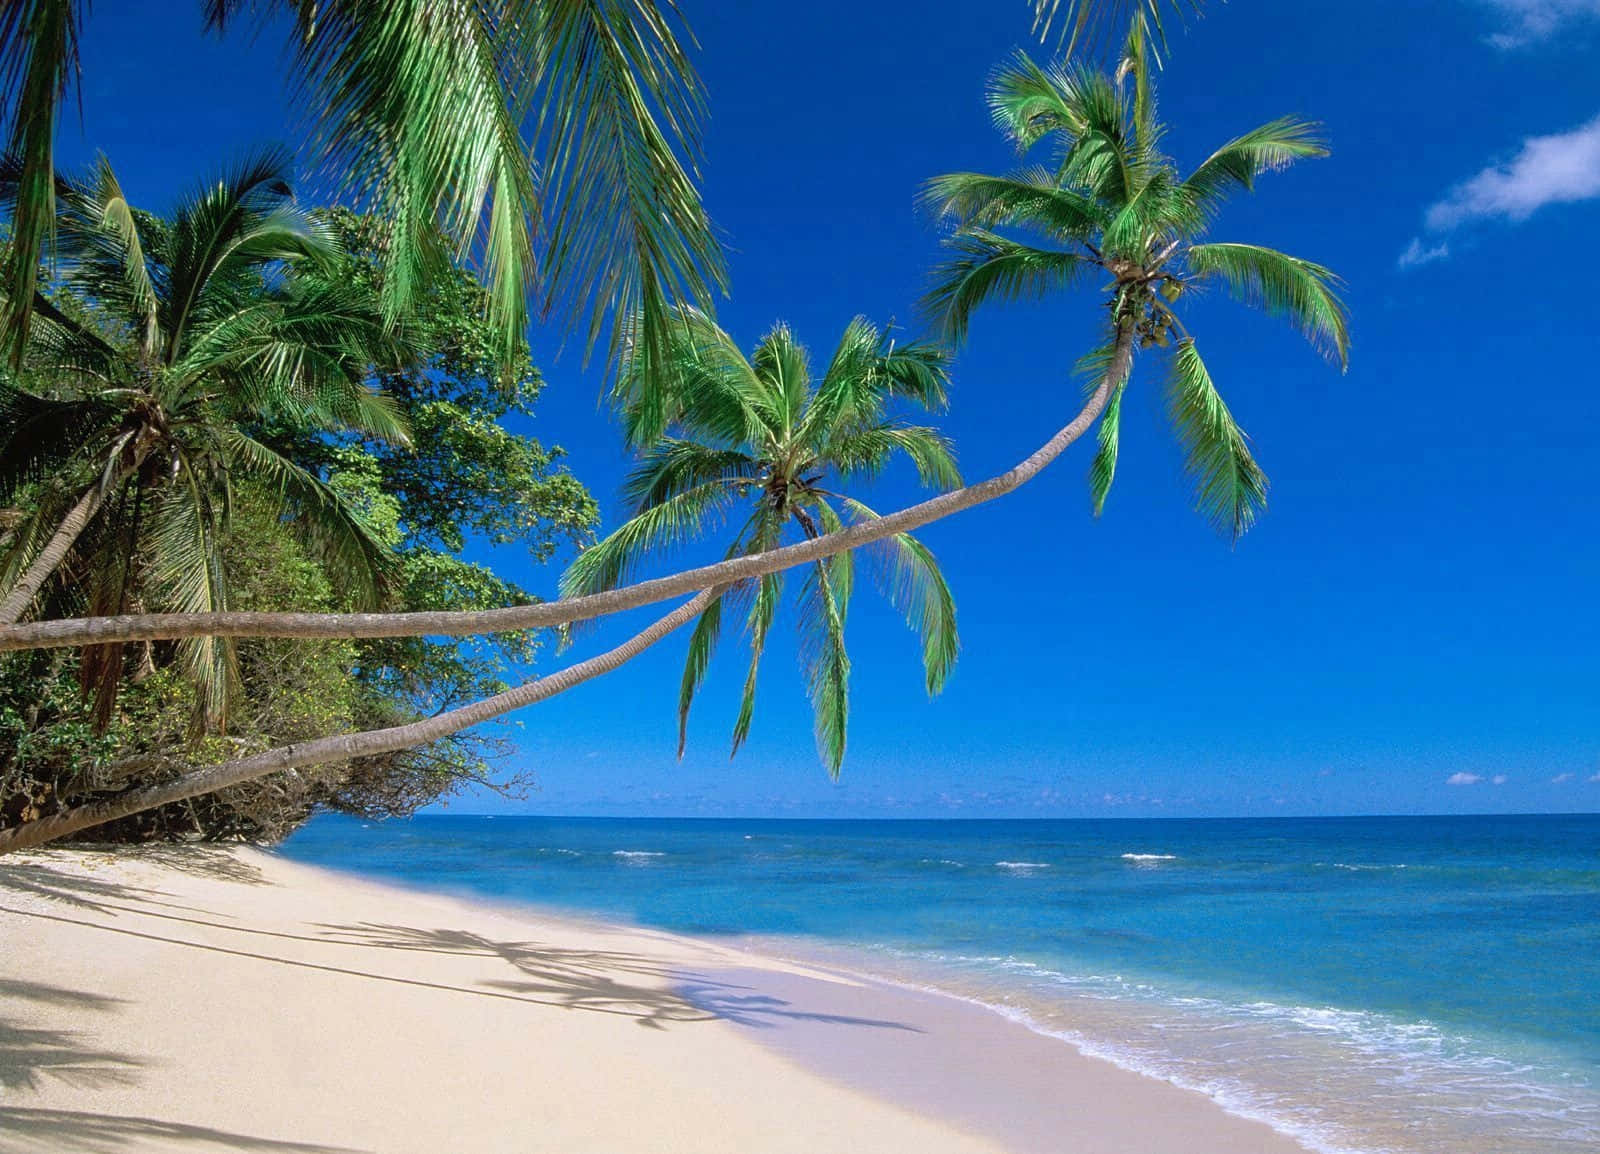 A paradise of tropical relaxation Wallpaper